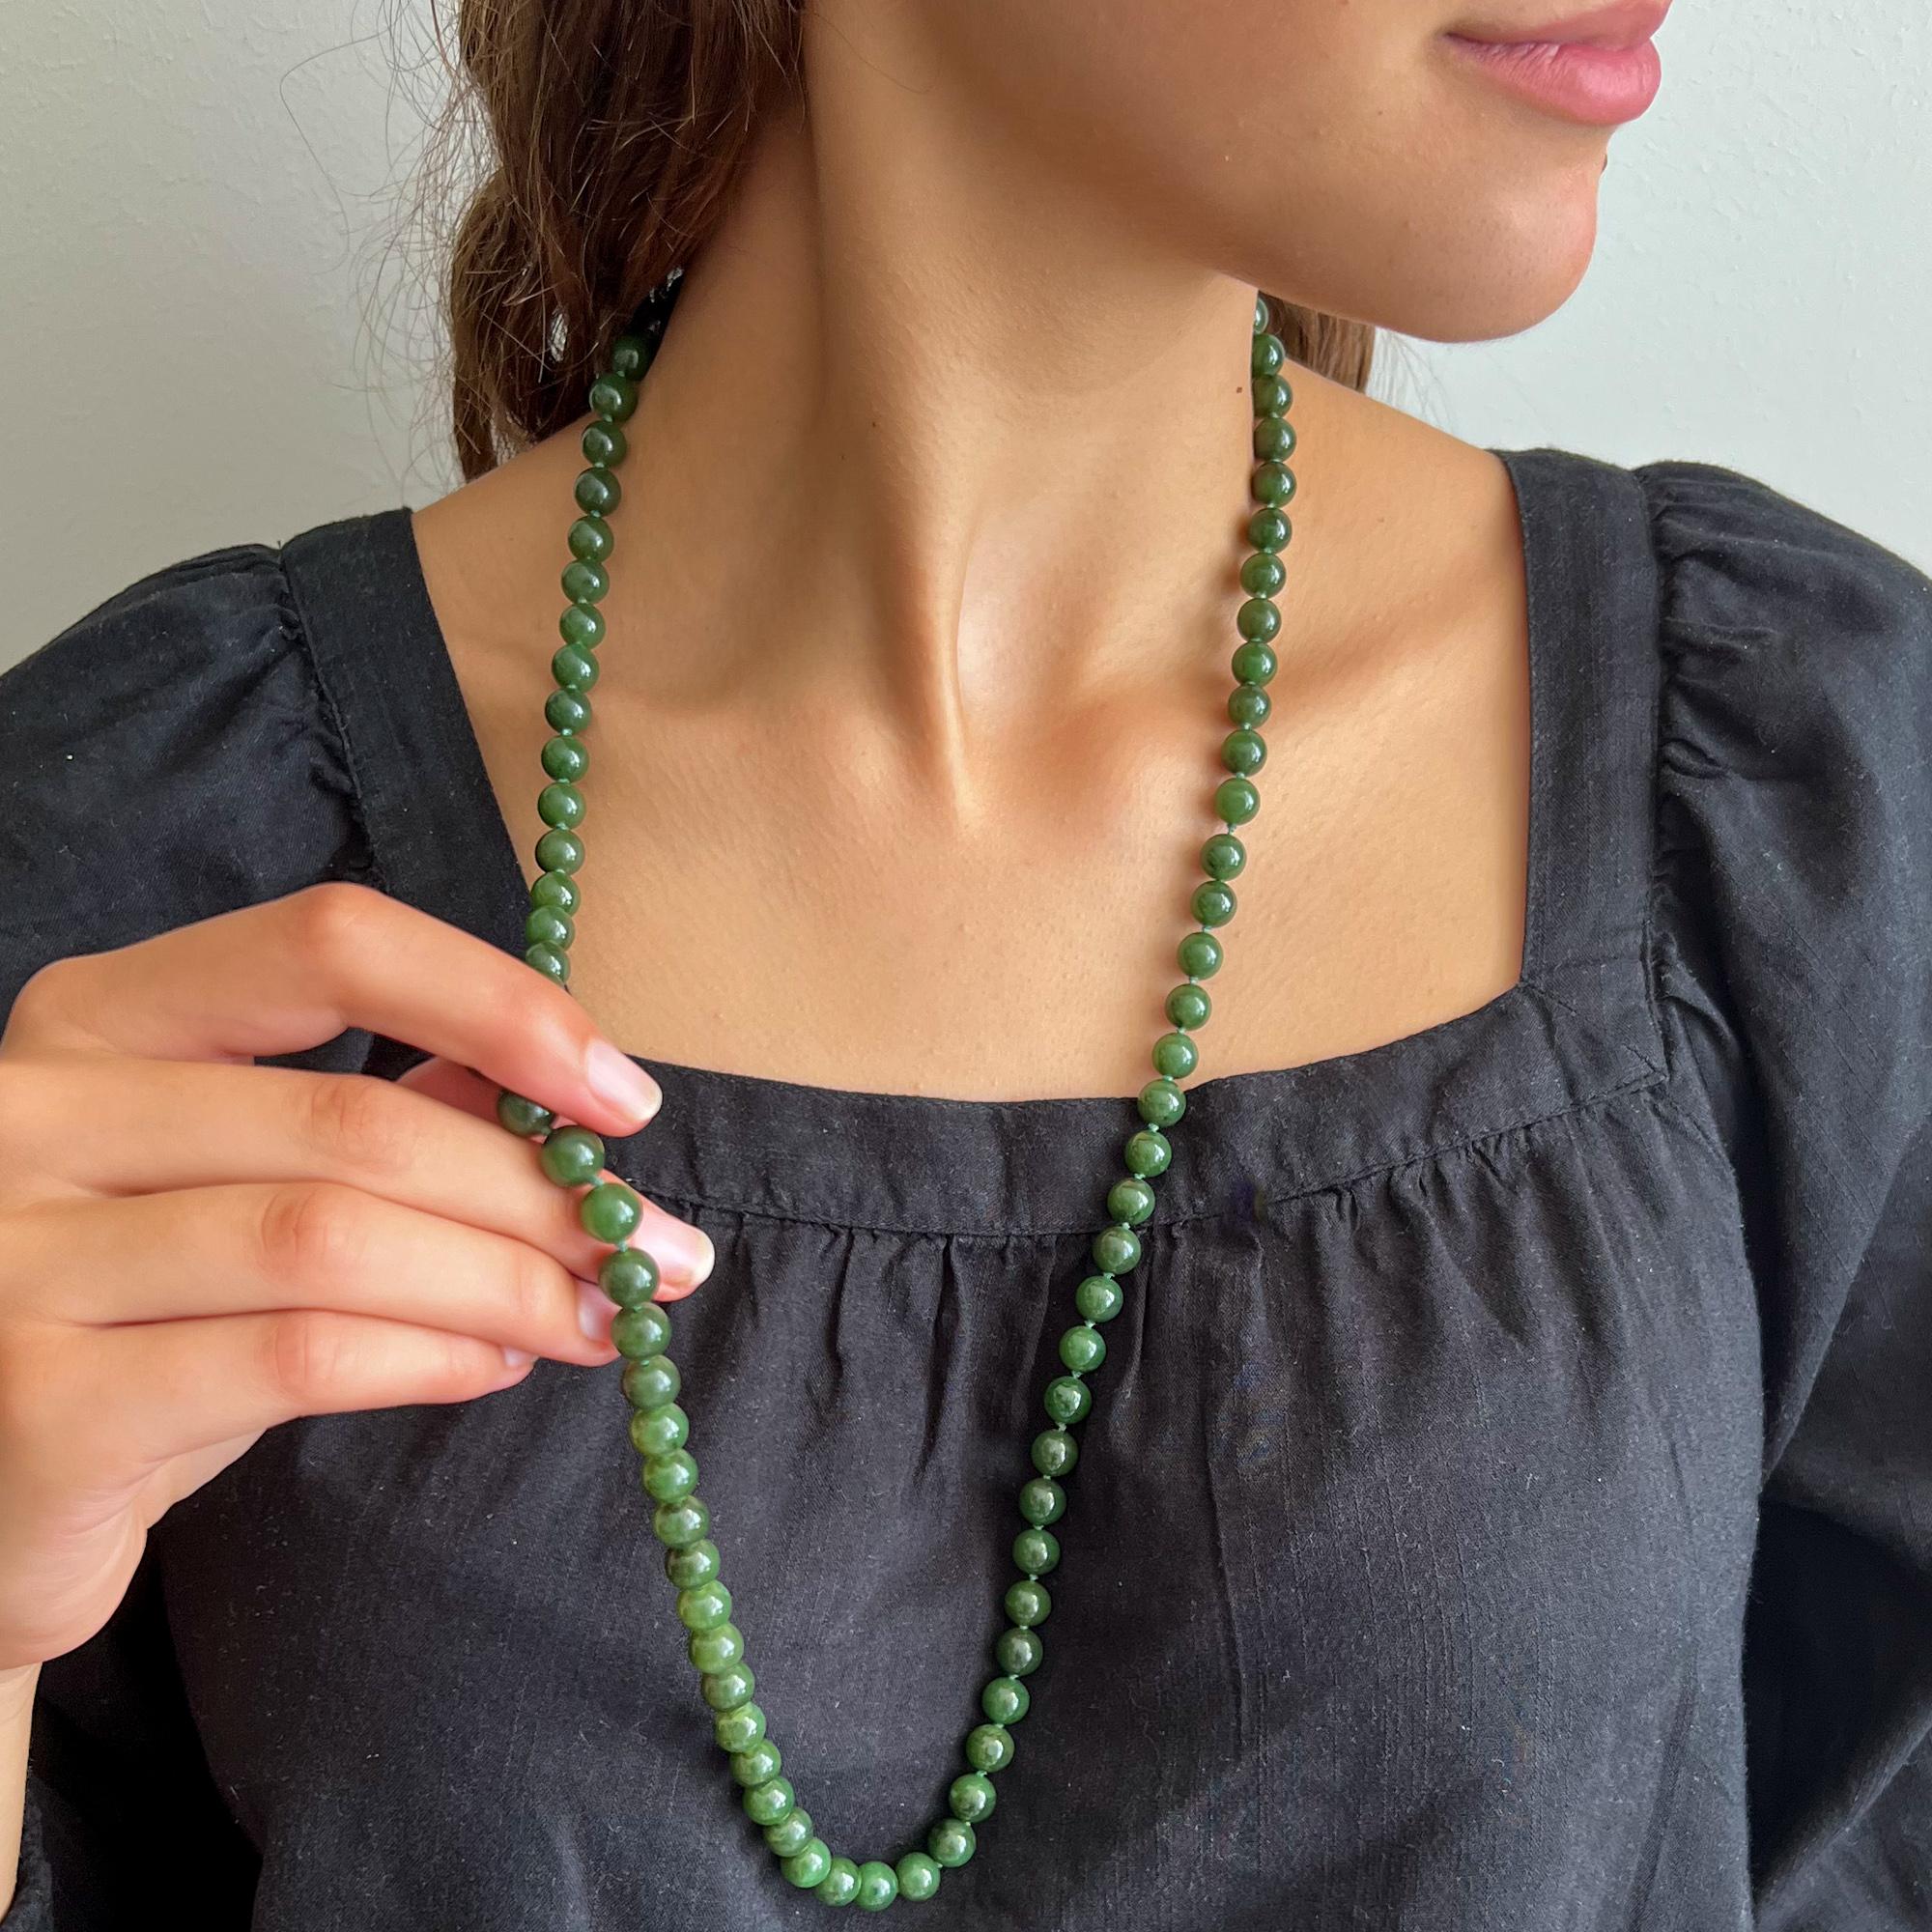 A lovely green nephrite jade single-strand beaded necklace. The length of the necklace is long and consists of round-shaped nephrite jade stones. The jade beads have a nice green color and are equally sized. To keep some space between the beads, the